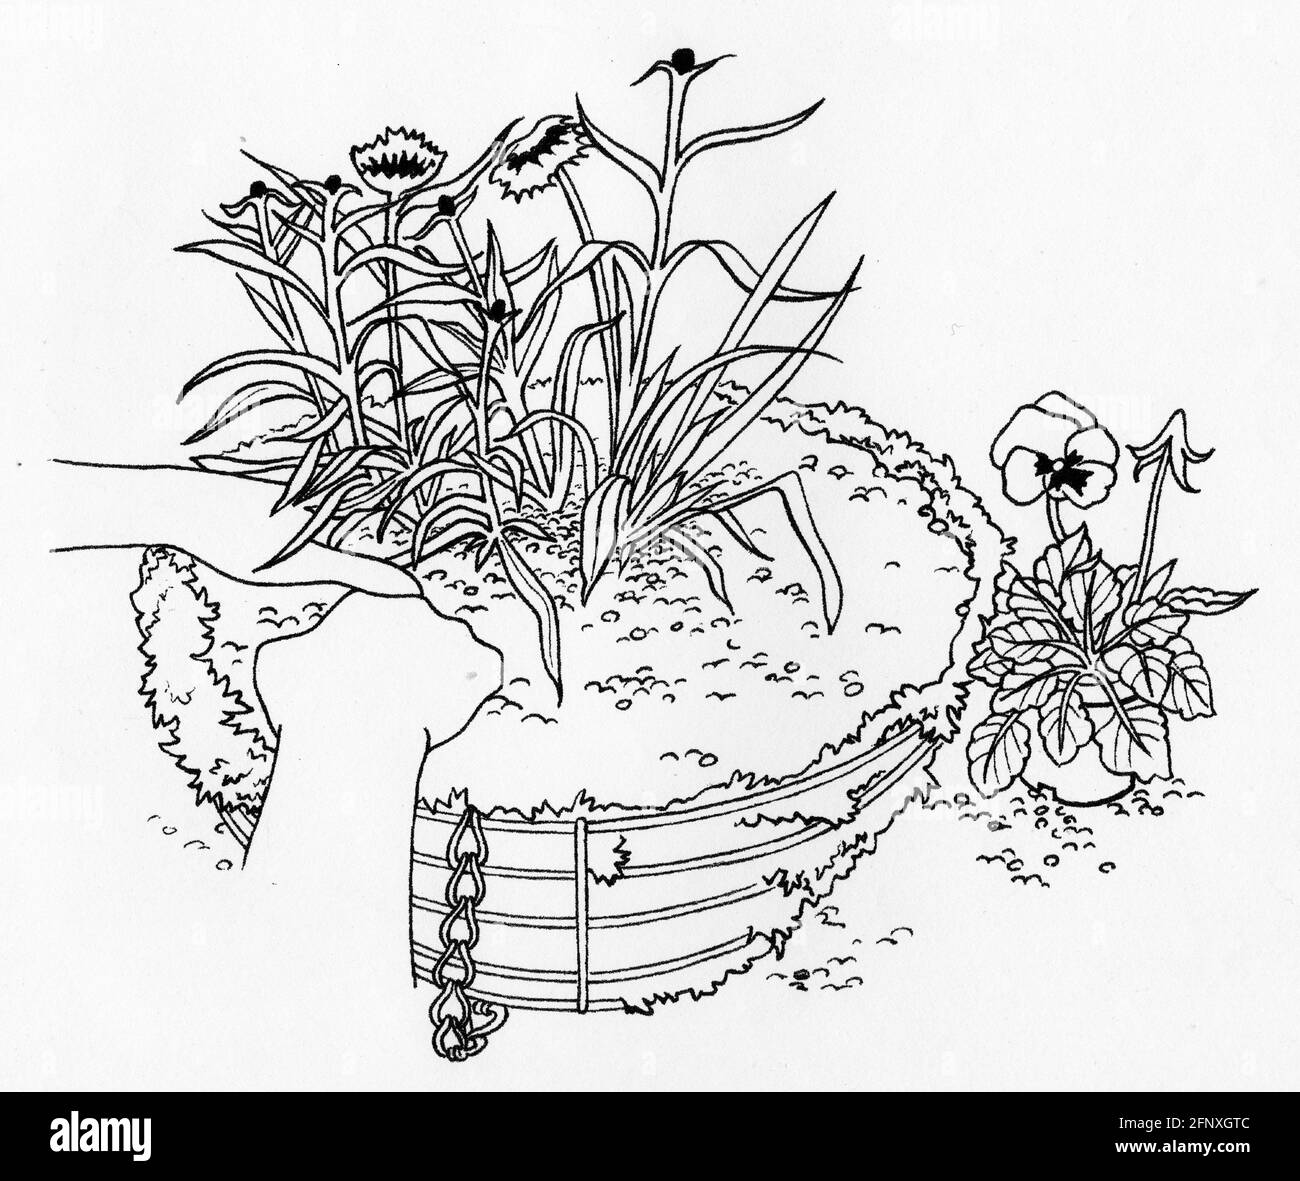 A drawing of a person top planting a hanging basket featuring a sphagnum moss liner and young plants Stock Photo